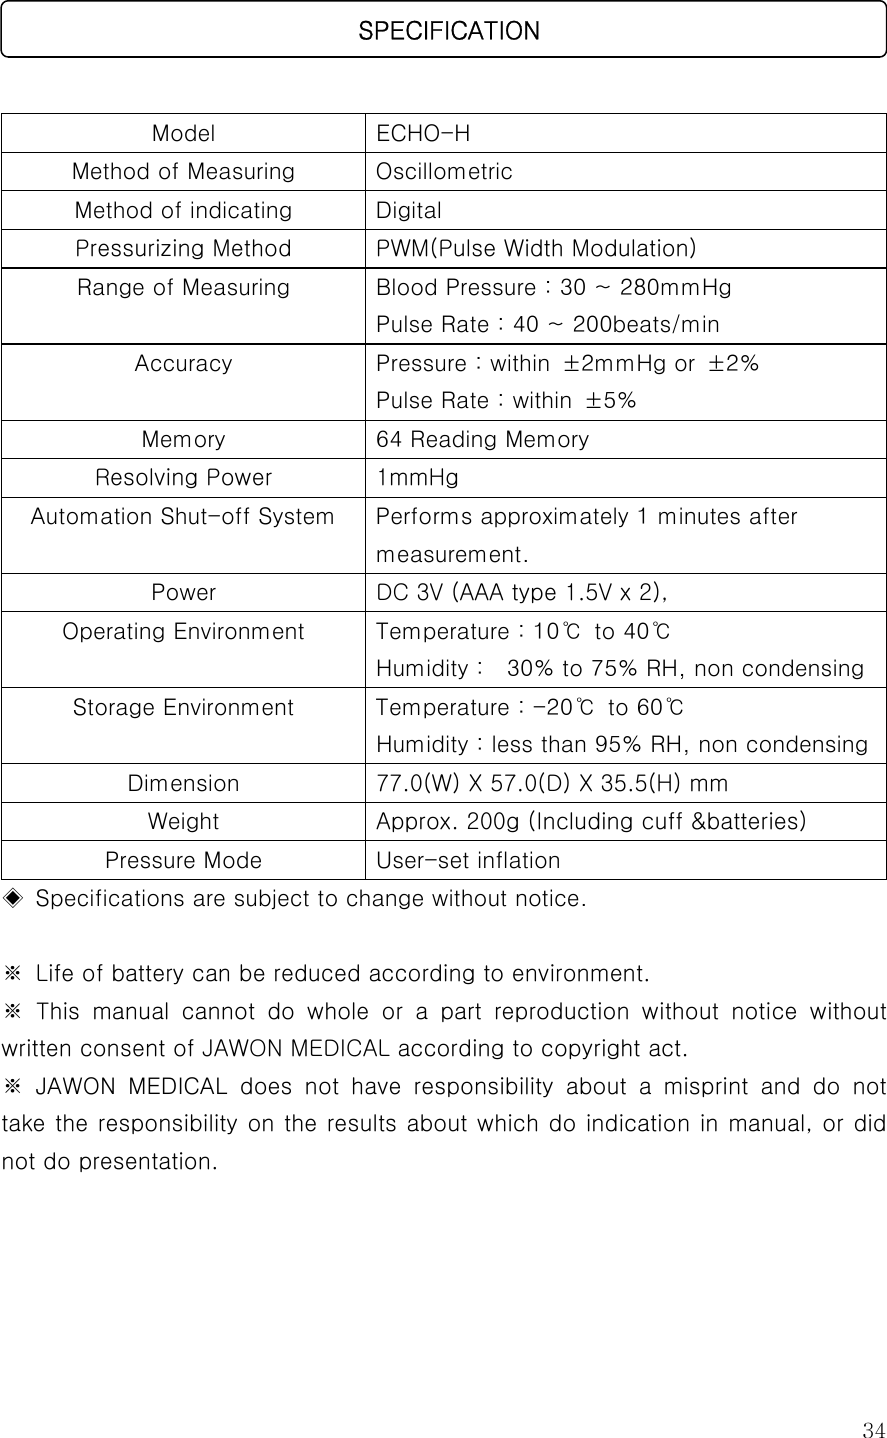  34   Model  ECHO-H   Method of Measuring  Oscillometric Method of indicating  Digital Pressurizing Method  PWM(Pulse Width Modulation) Range of Measuring  Blood Pressure : 30 ~ 280mmHg Pulse Rate : 40 ~ 200beats/min Accuracy  Pressure : within  ±2mmHg or  ±2% Pulse Rate : within  ±5% Memory  64 Reading Memory Resolving Power  1mmHg Automation Shut-off System  Performs approximately 1 minutes after measurement. Power DC 3V (AAA type 1.5V x 2),  Operating Environment  Temperature : 10℃ to 40℃ Humidity :    30% to 75% RH, non condensing Storage Environment  Temperature : -20℃ to 60℃ Humidity : less than 95% RH, non condensingDimension  77.0(W) X 57.0(D) X 35.5(H) mm  Weight  Approx. 200g (Including cuff &amp;batteries) Pressure Mode  User-set inflation ◈  Specifications are subject to change without notice.  ※  Life of battery can be reduced according to environment.   ※  This  manual  cannot  do  whole  or  a  part  reproduction  without  notice  without written consent of JAWON MEDICAL according to copyright act. ※  JAWON  MEDICAL  does  not  have  responsibility  about  a  misprint  and  do  not take the responsibility on the results about which do indication in  manual, or did not do presentation.       SPECIFICATION 